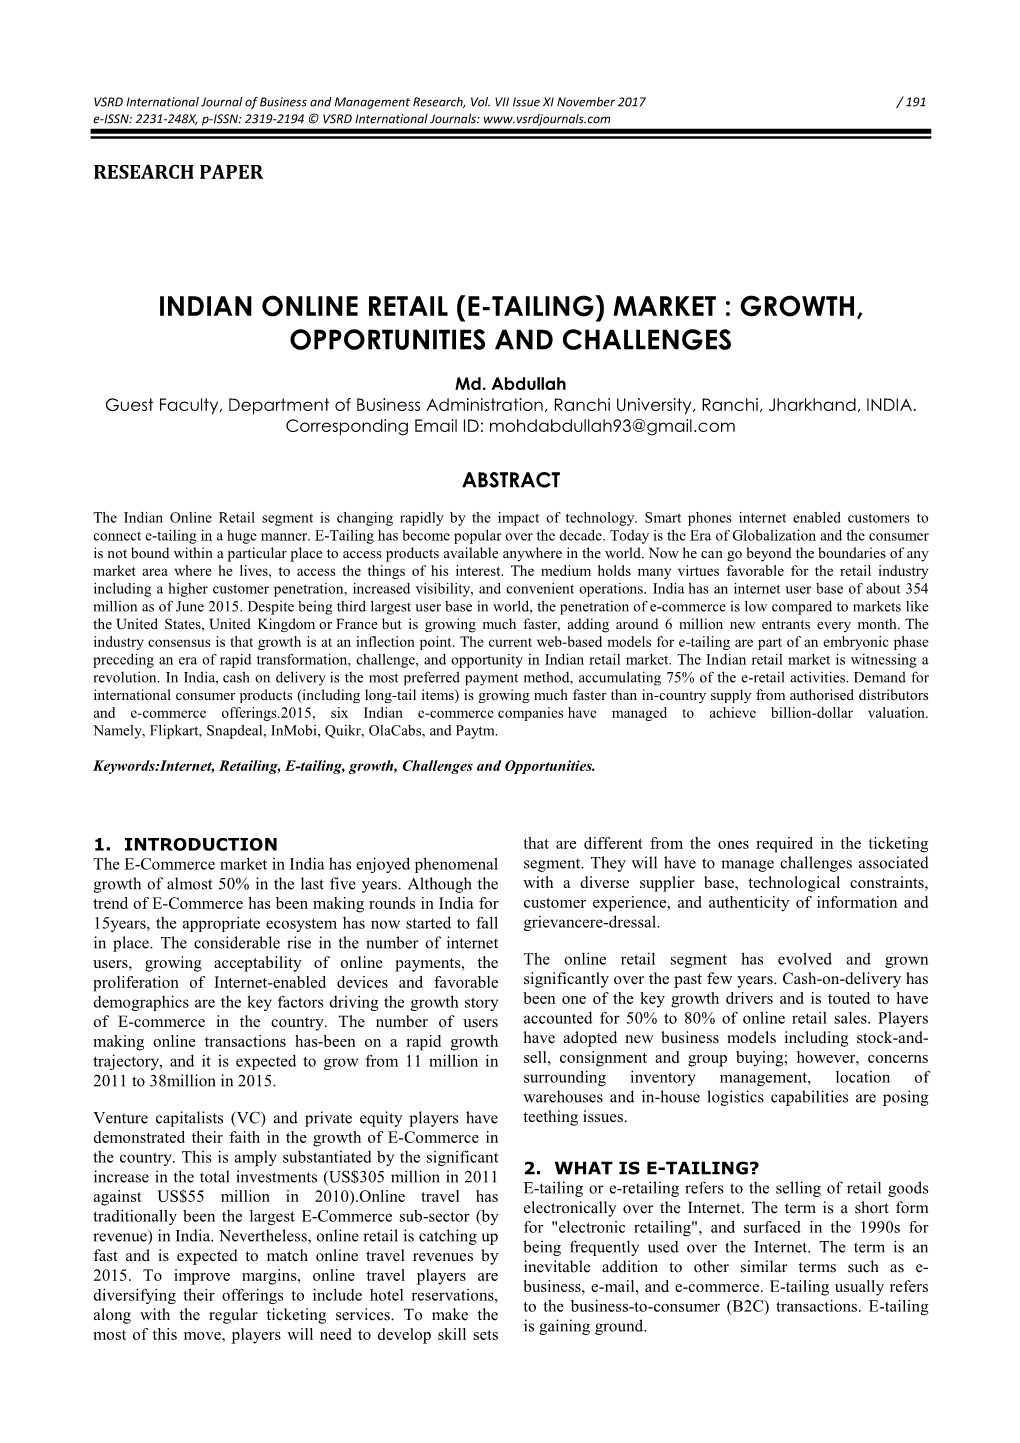 E-Tailing) Market : Growth, Opportunities and Challenges